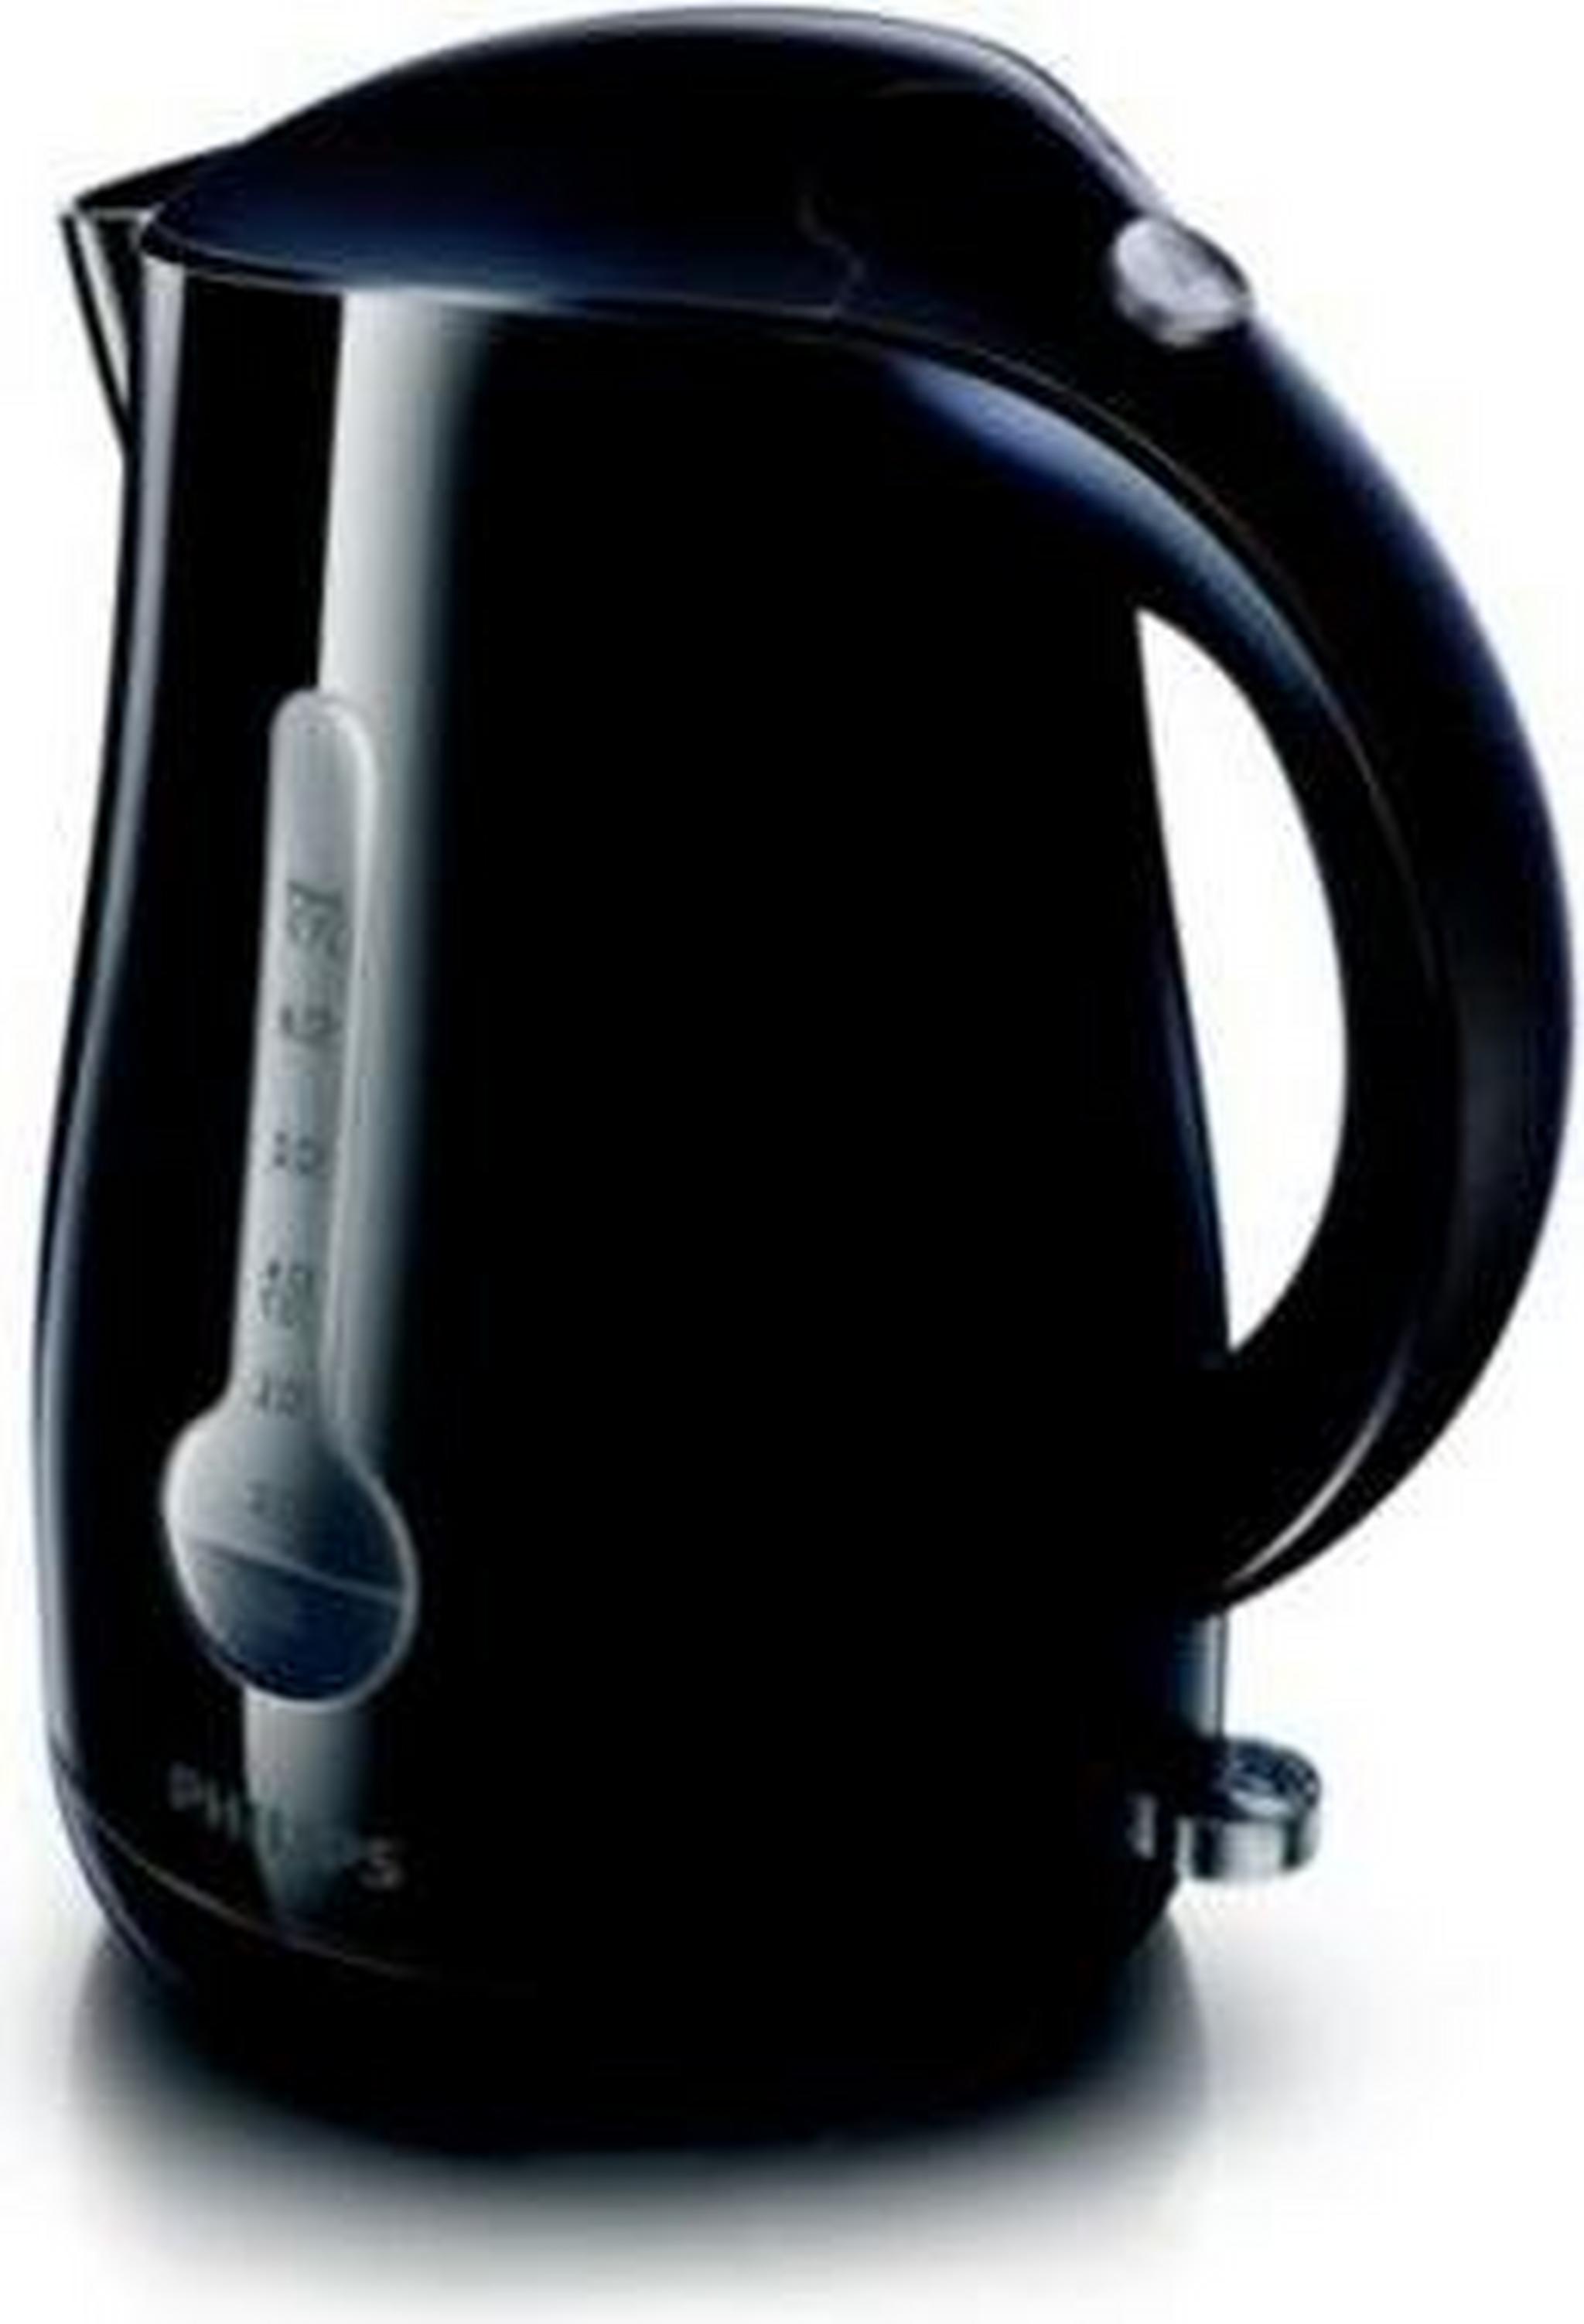 Philips Viva Kettle 2400W 1.7Litres with 1 cup indicator - HD4677/20 (Black)